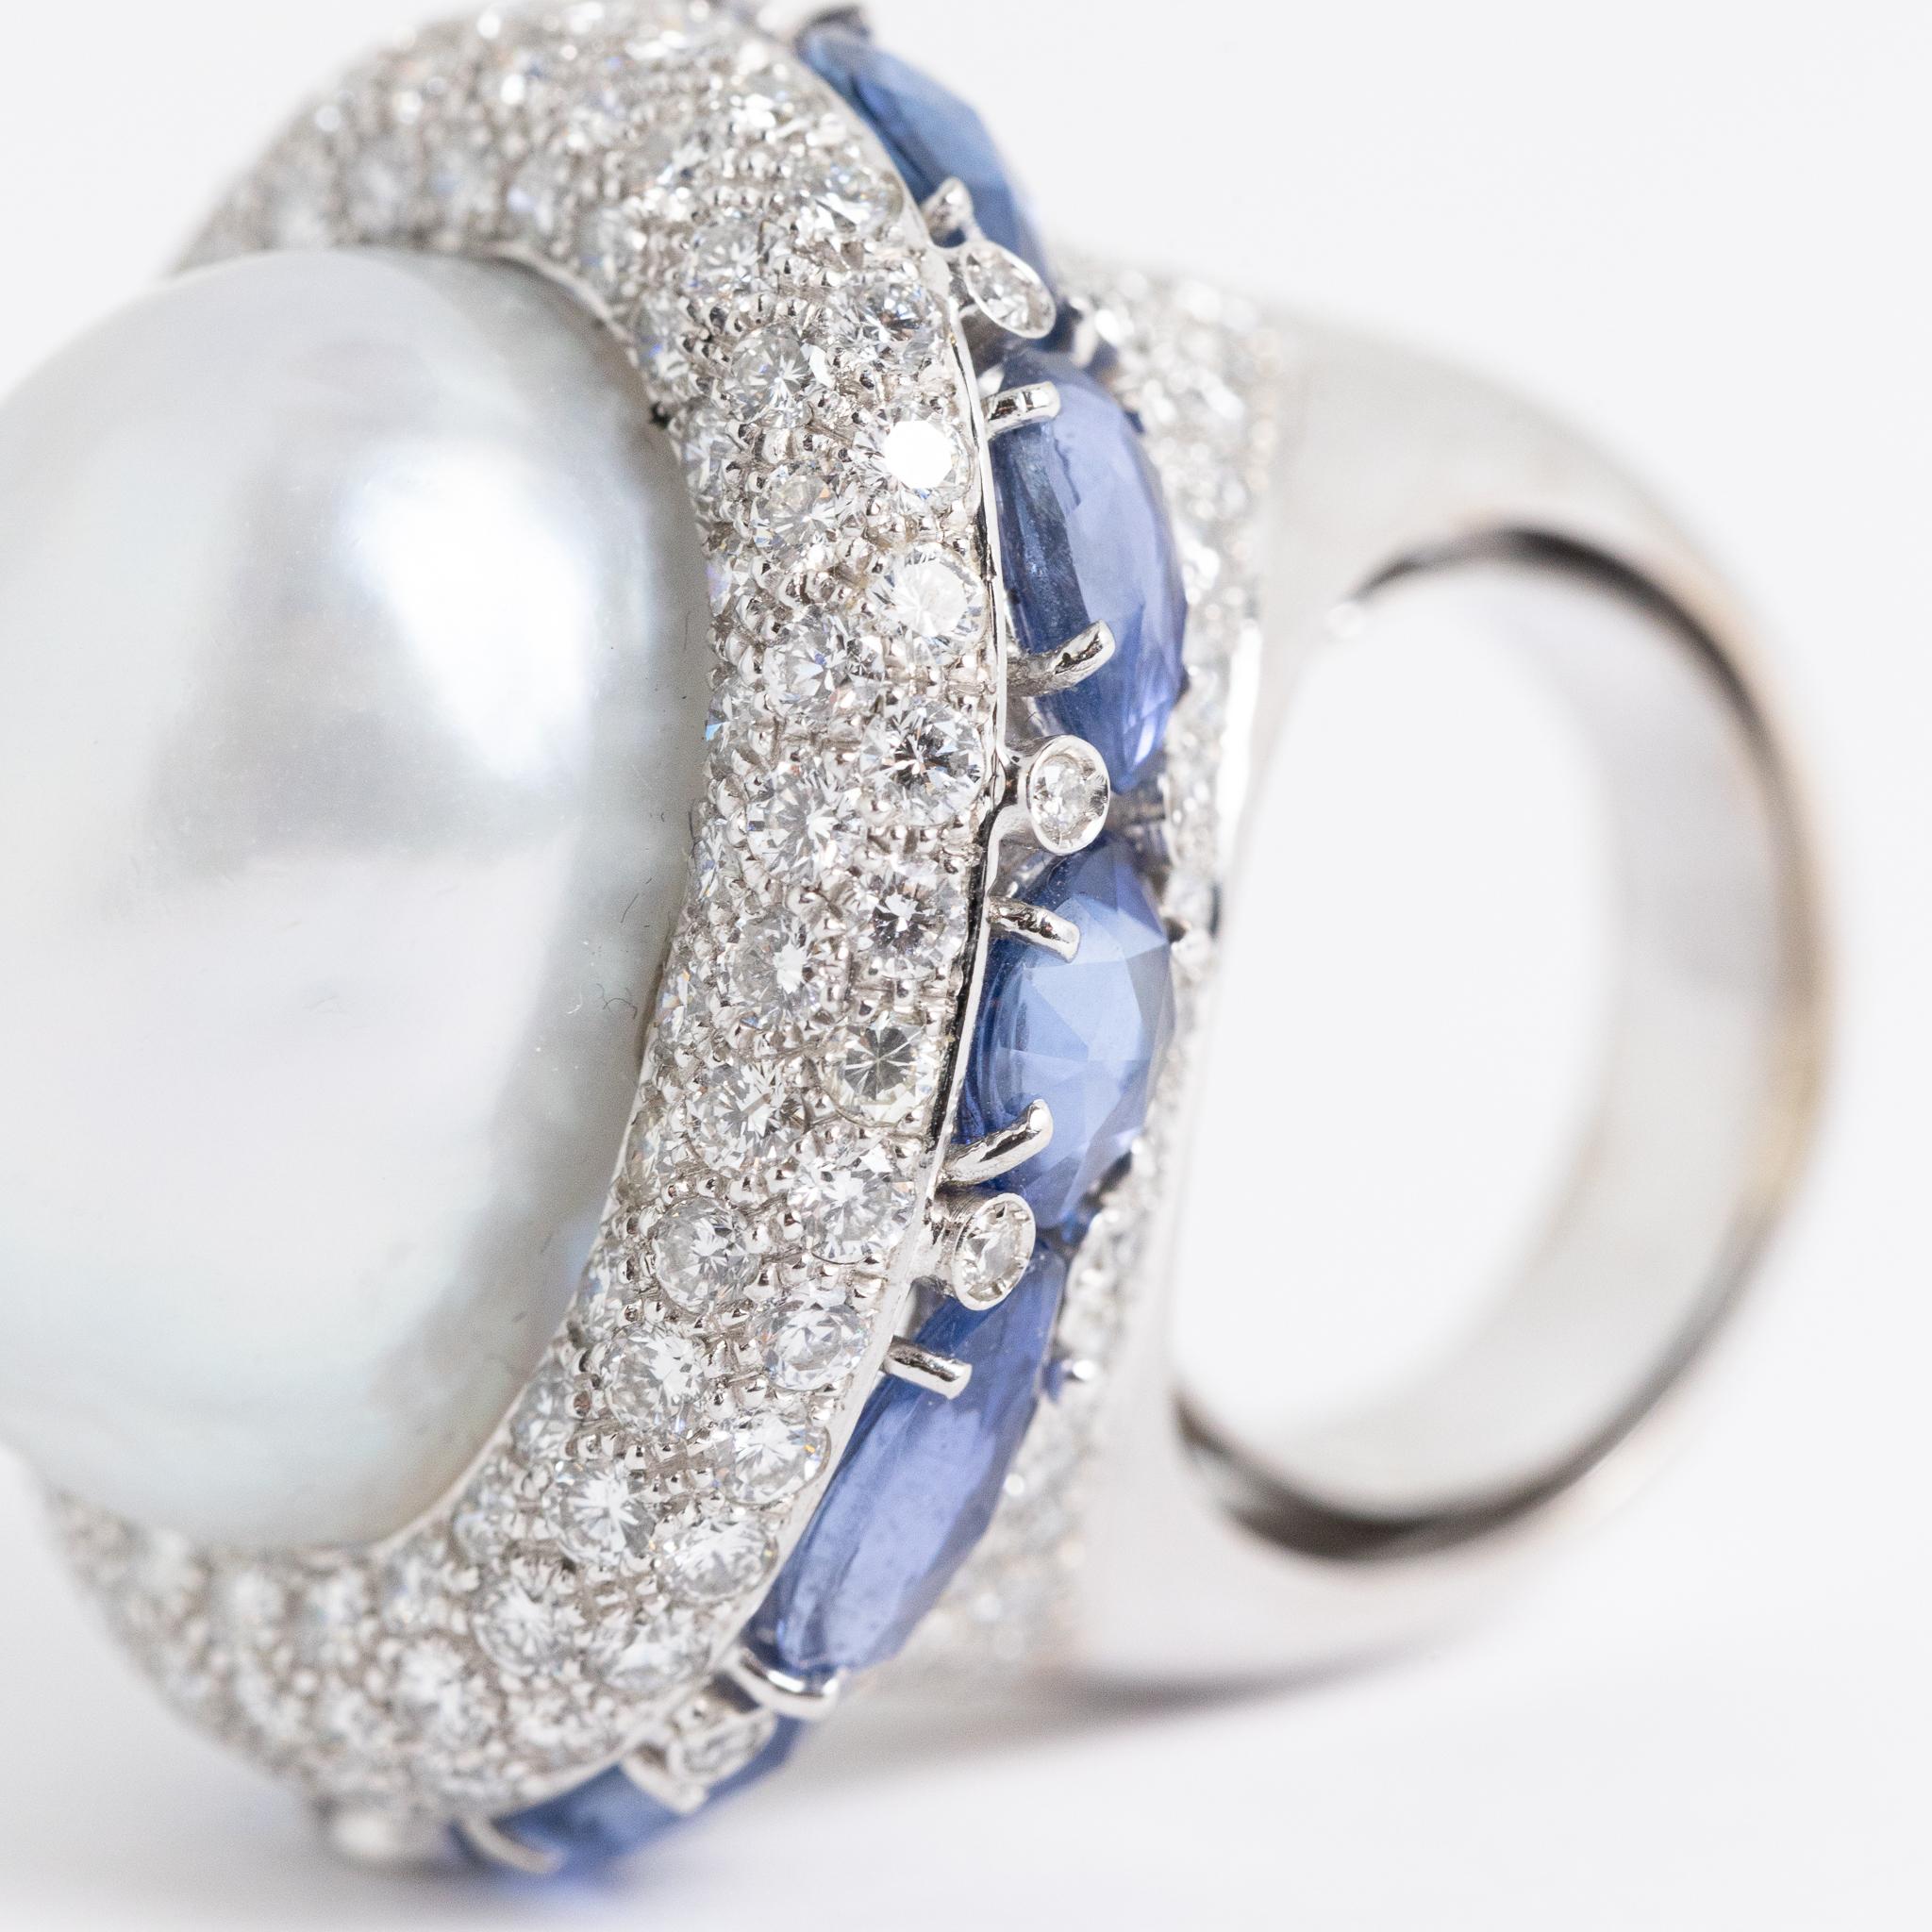 18 kt. white gold ring with 4.20 ct. of round cut diamonds ( H-I color / VVS1-VVS2 ), 11.90 ct. of double rose-cut blue sapphires and baroque pearl.
This cocktail ring is hand-made in Italy.
The size of the baroque Australian pearl is 21.00 x 16.00